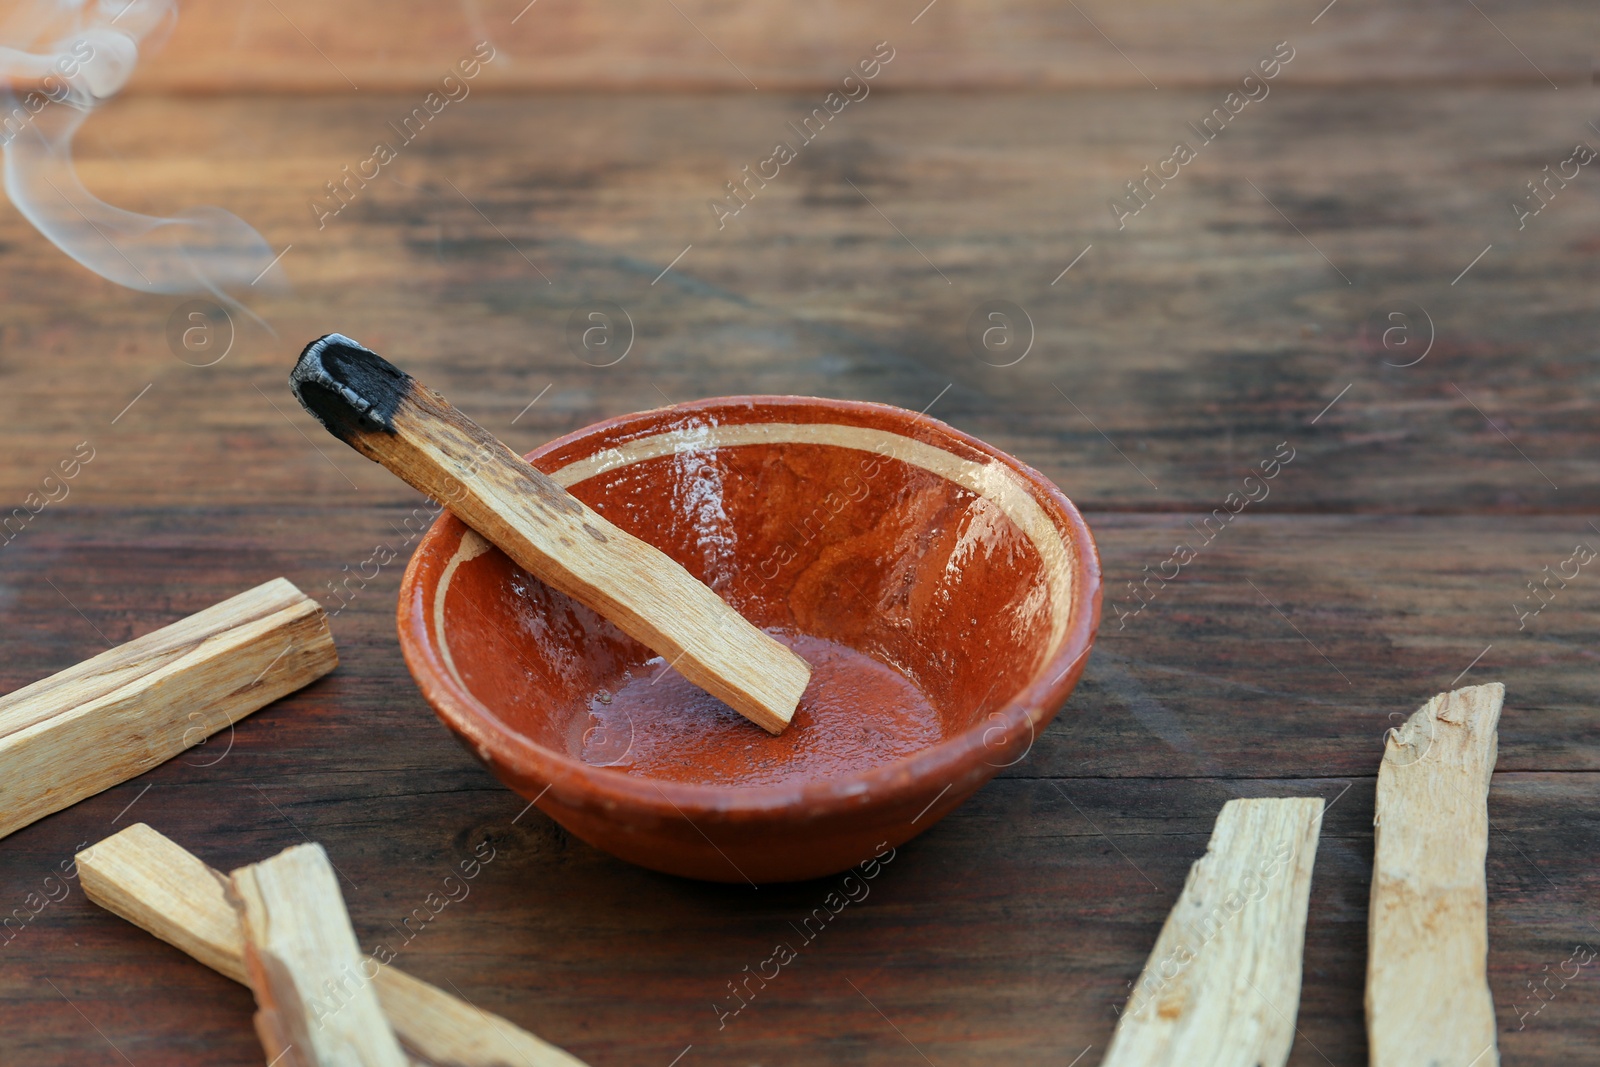 Photo of Palo santo stick smoldering in bowl on wooden table